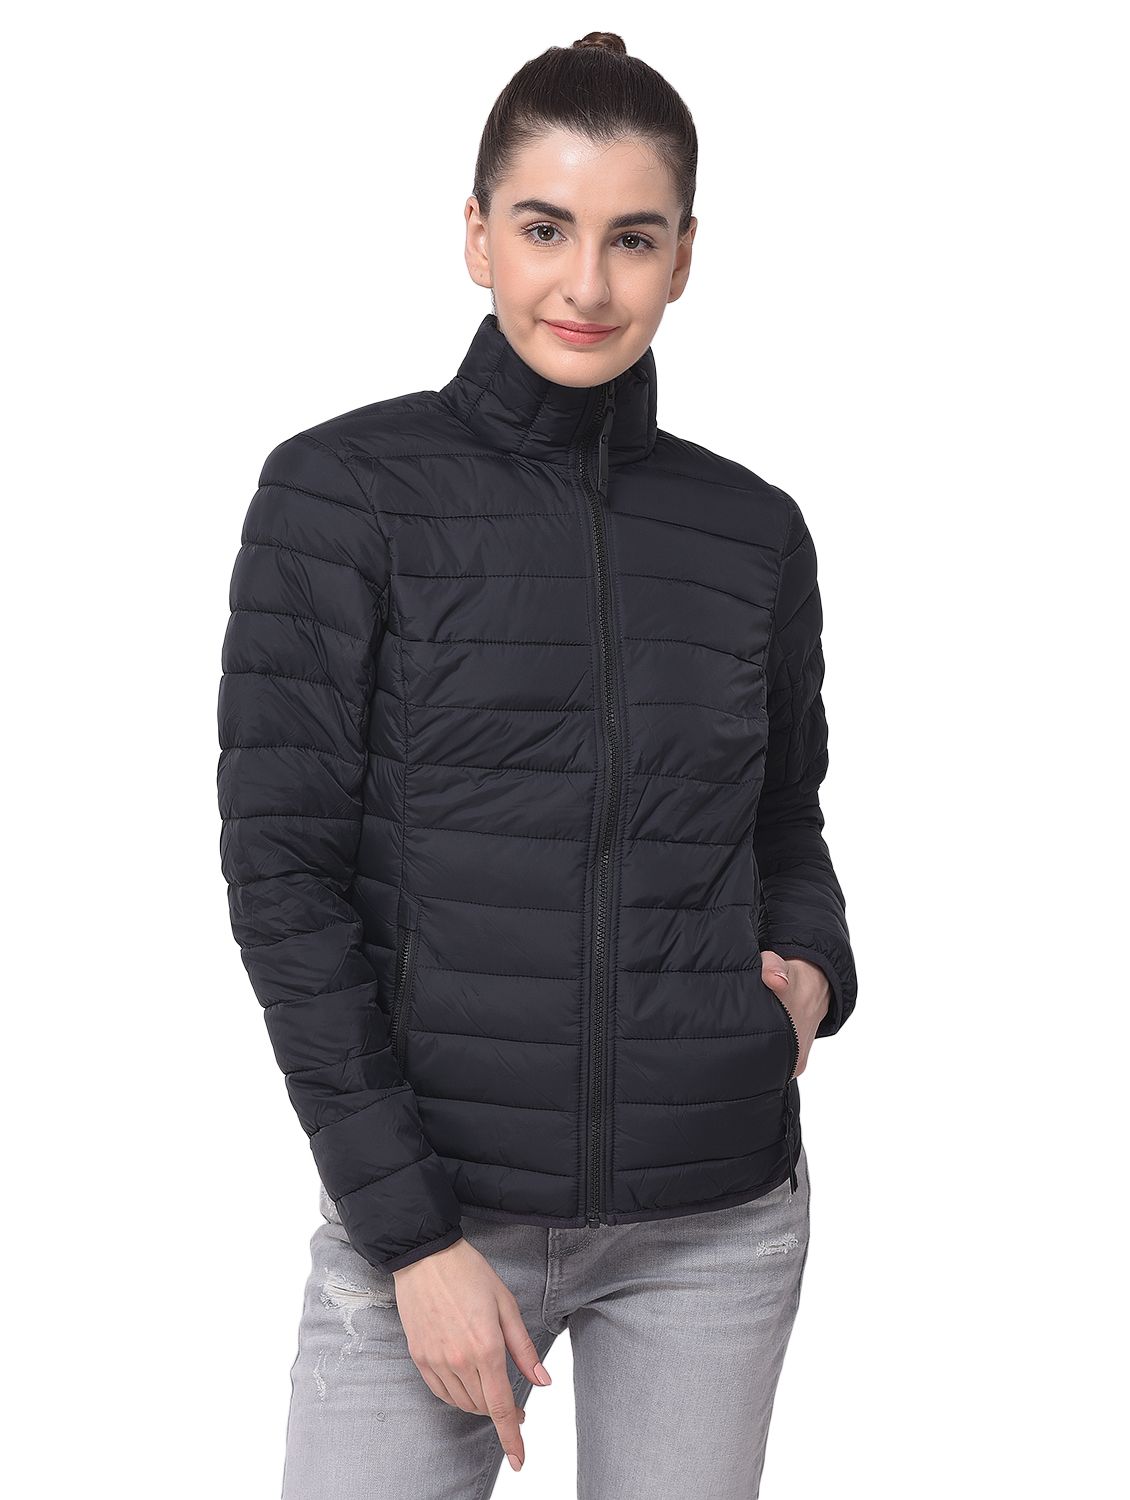 BLACK Quilted Jacket